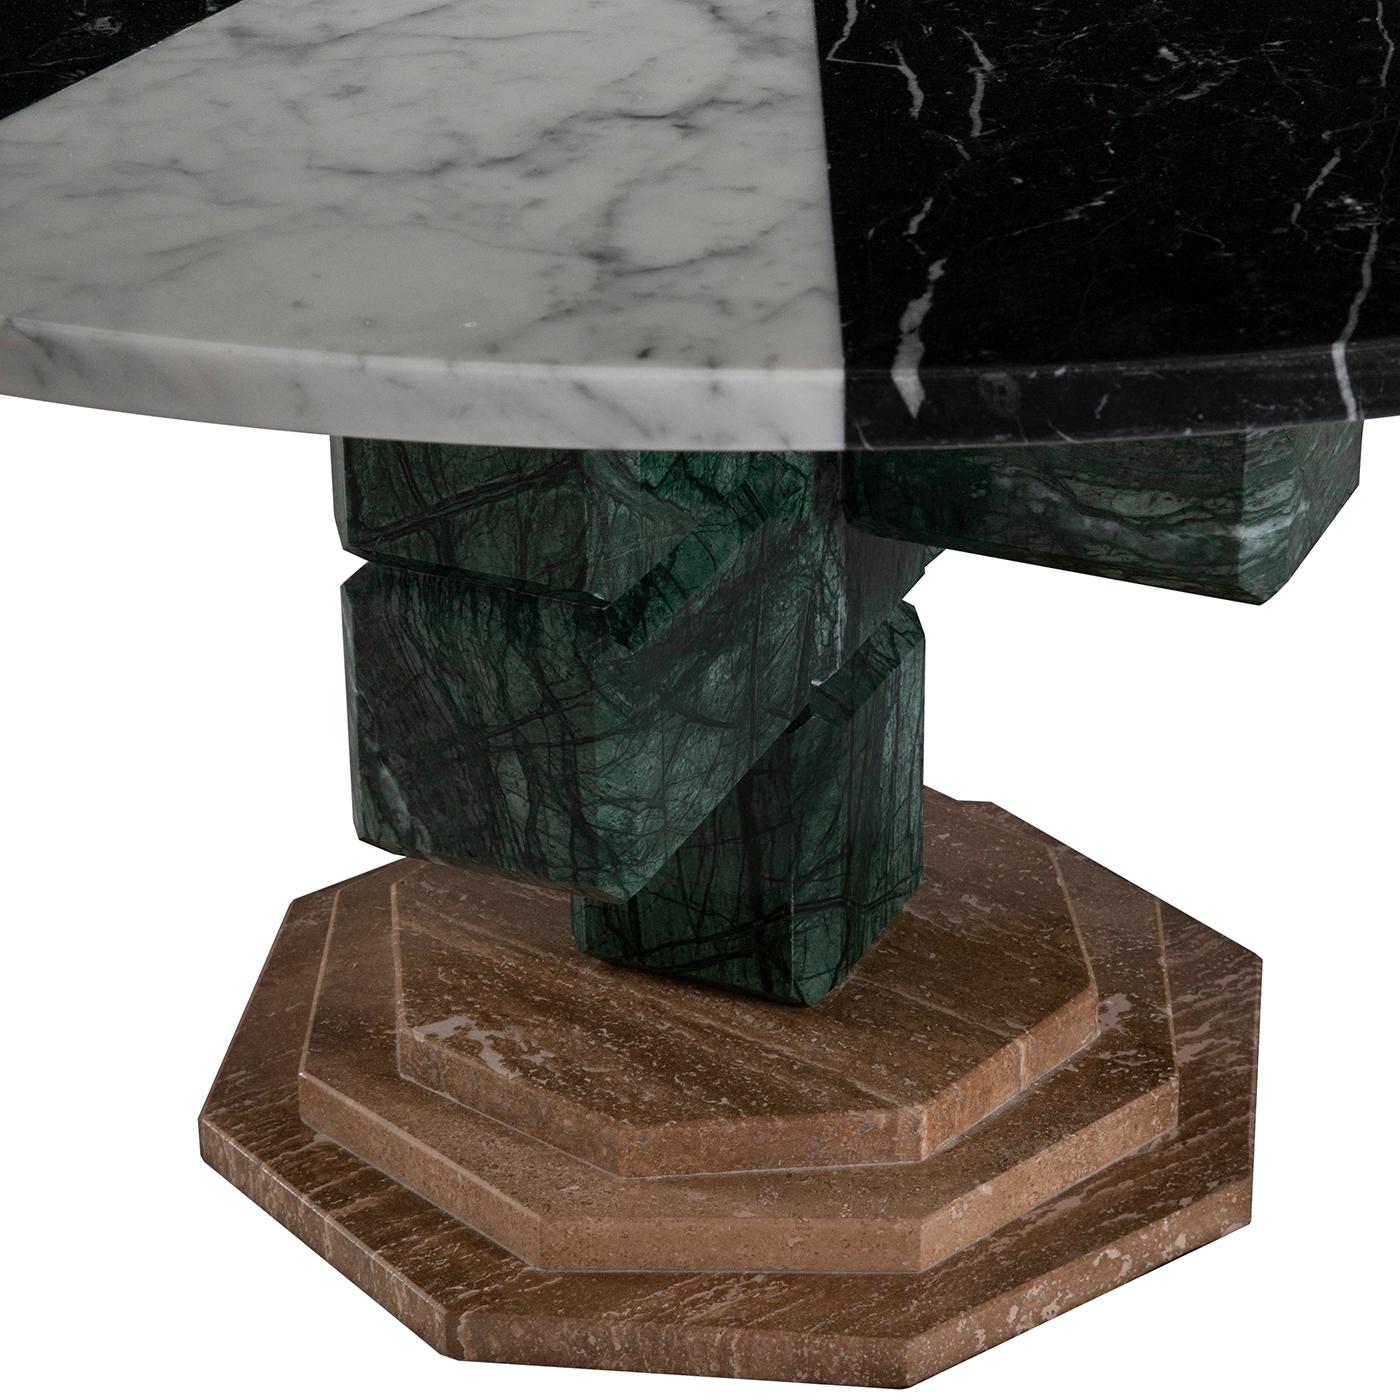 Boasting the natural strength and sophistication of marble, this coffee table can be used to make a statement in a modern or eclectic interior, either alone or combined with other pieces in the Caxus limited series. This piece features a round base